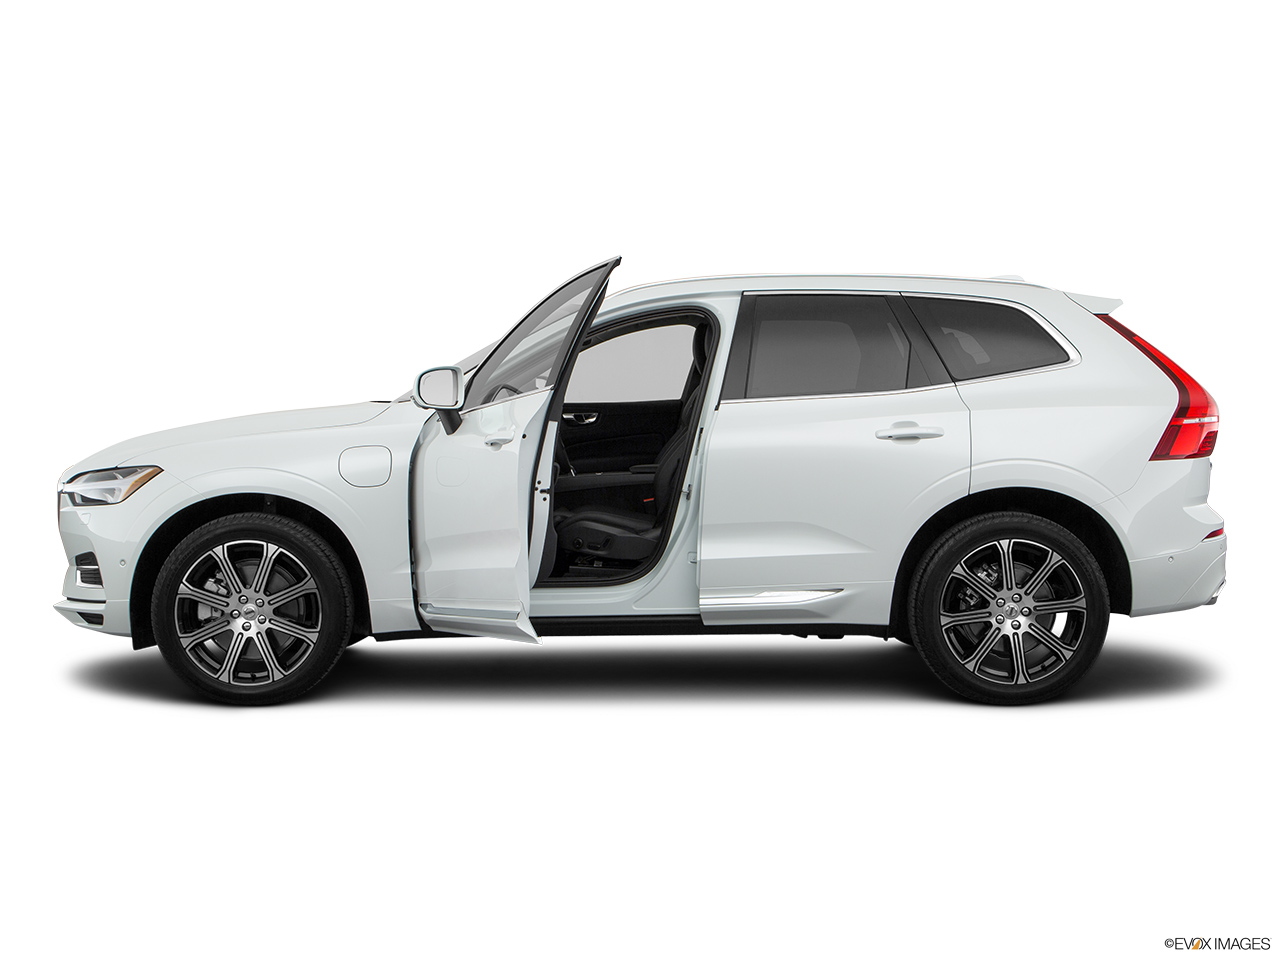 2019 Volvo XC60 T8 Inscription eAWD Plug-in Hybrid Driver's side profile with drivers side door open. 